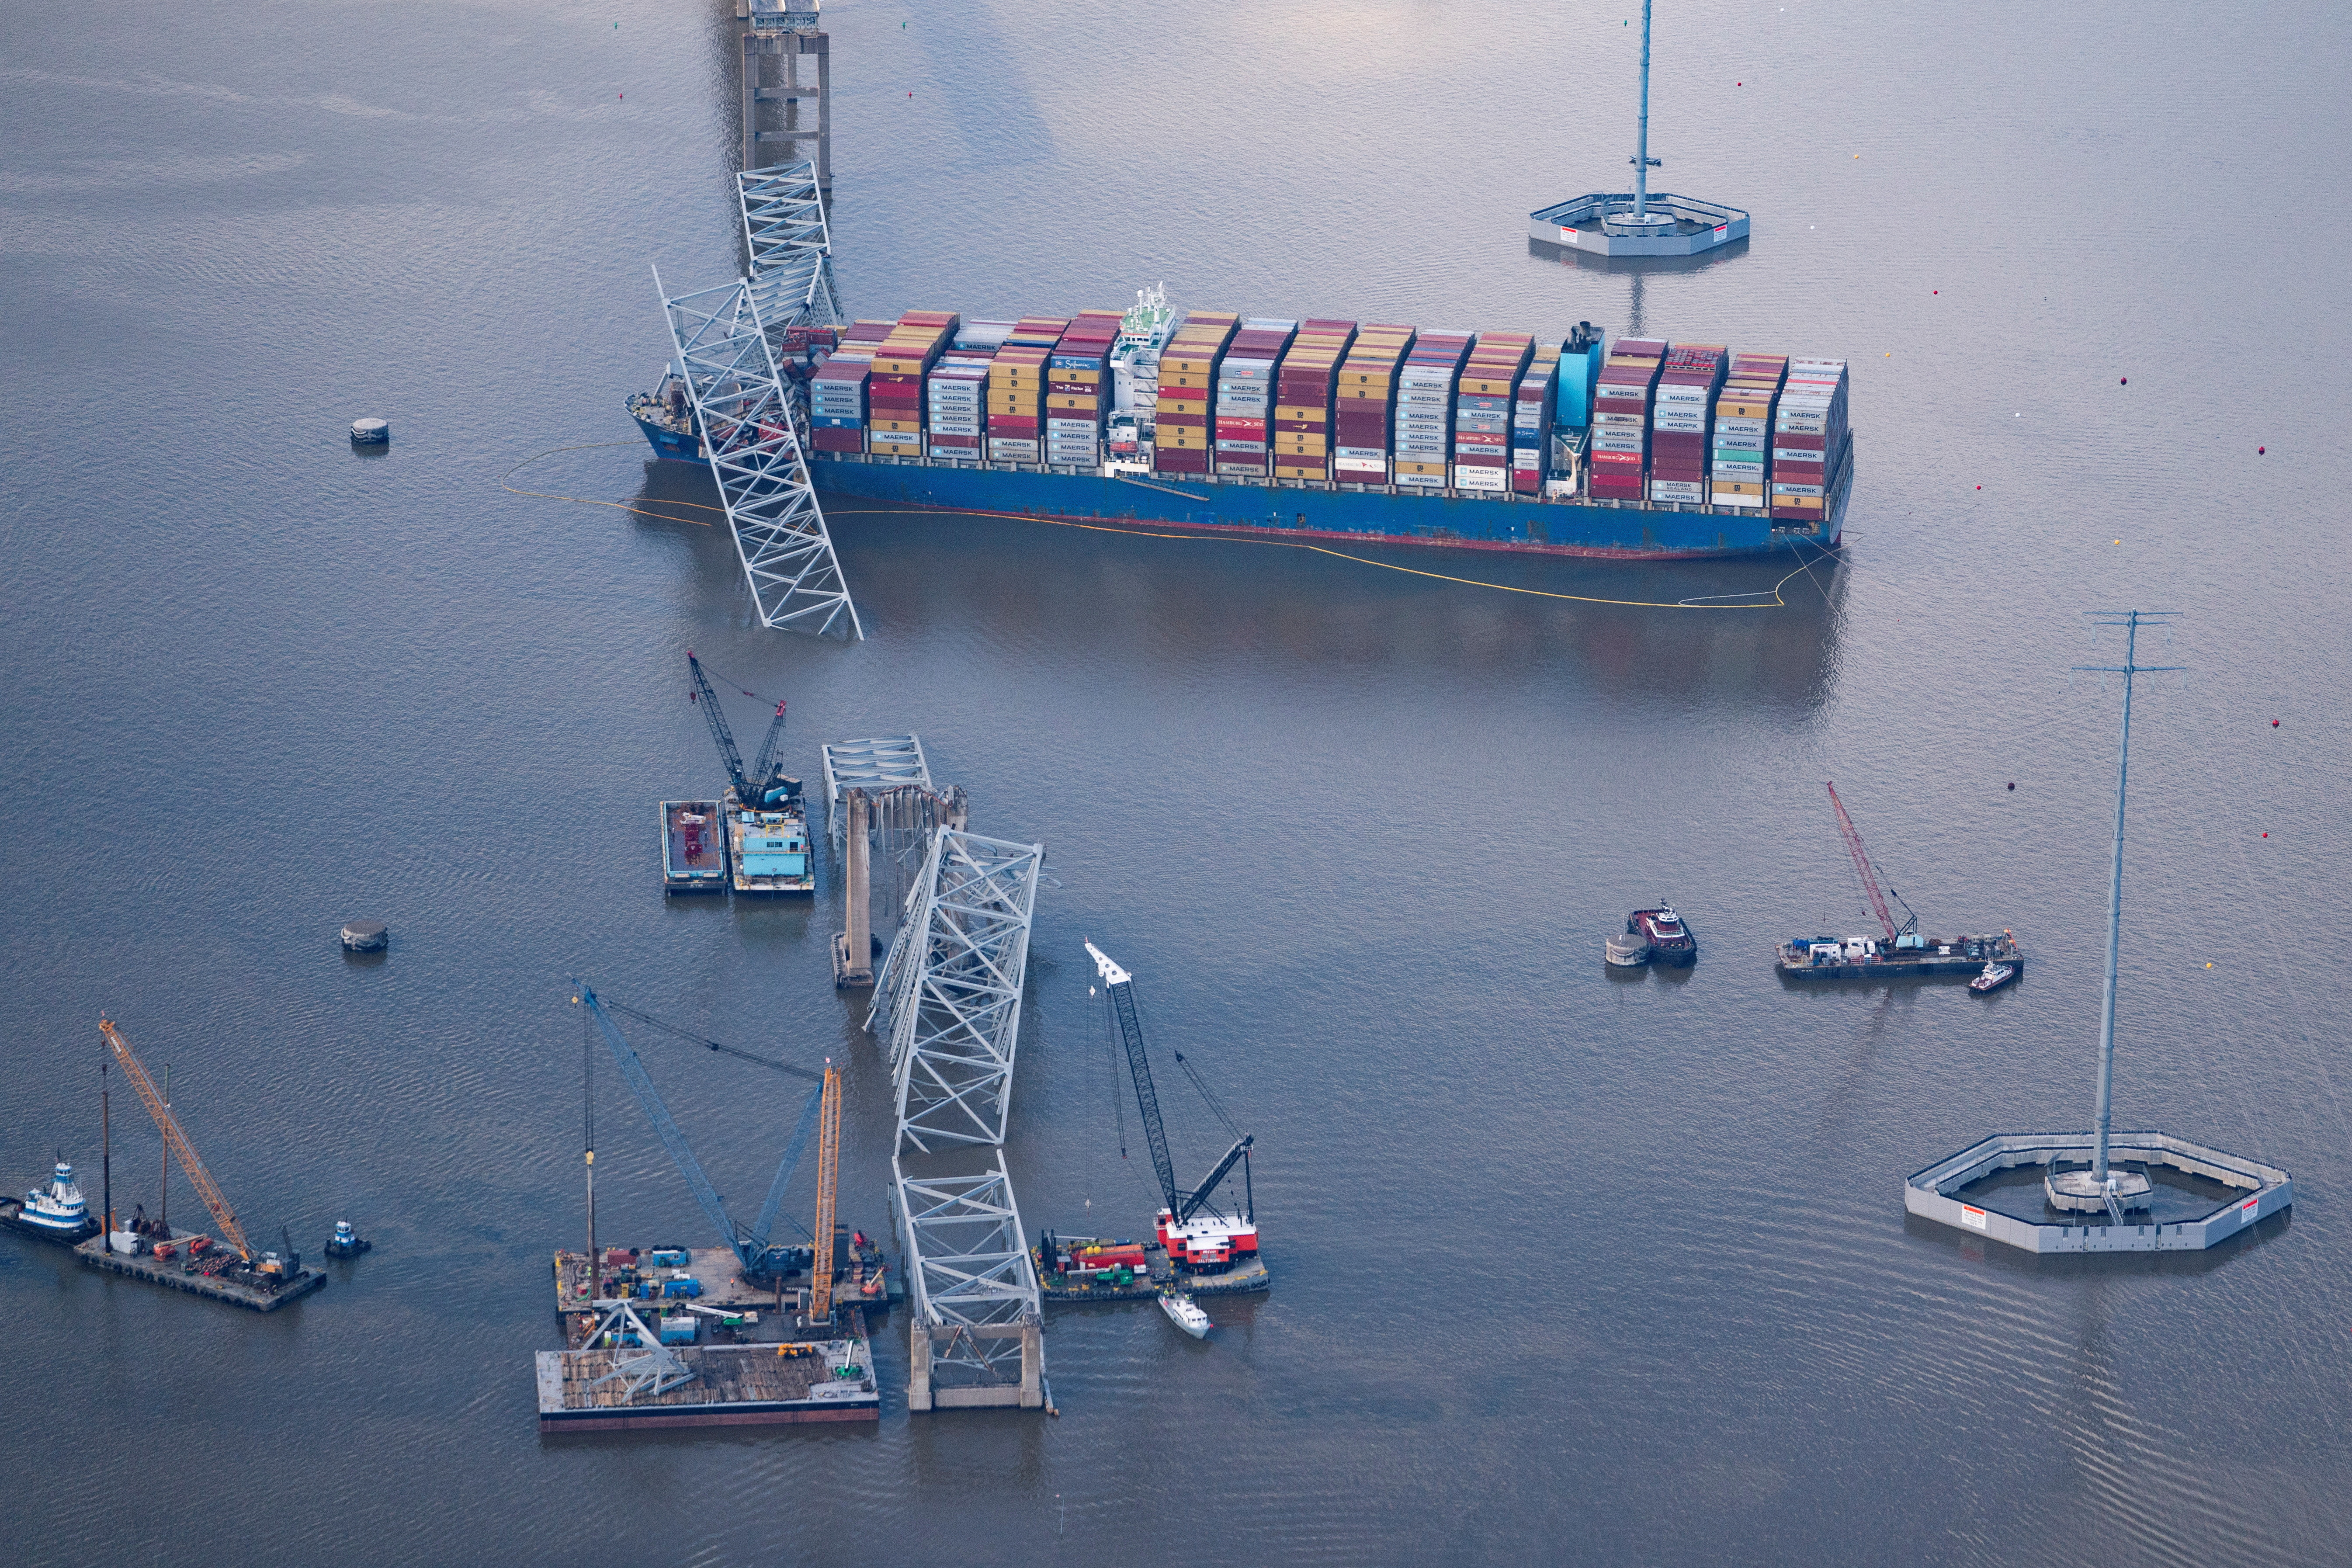 View of the Dali cargo vessel which crashed into the Francis Scott Key Bridge causing it to collapse in Baltimore, Maryland